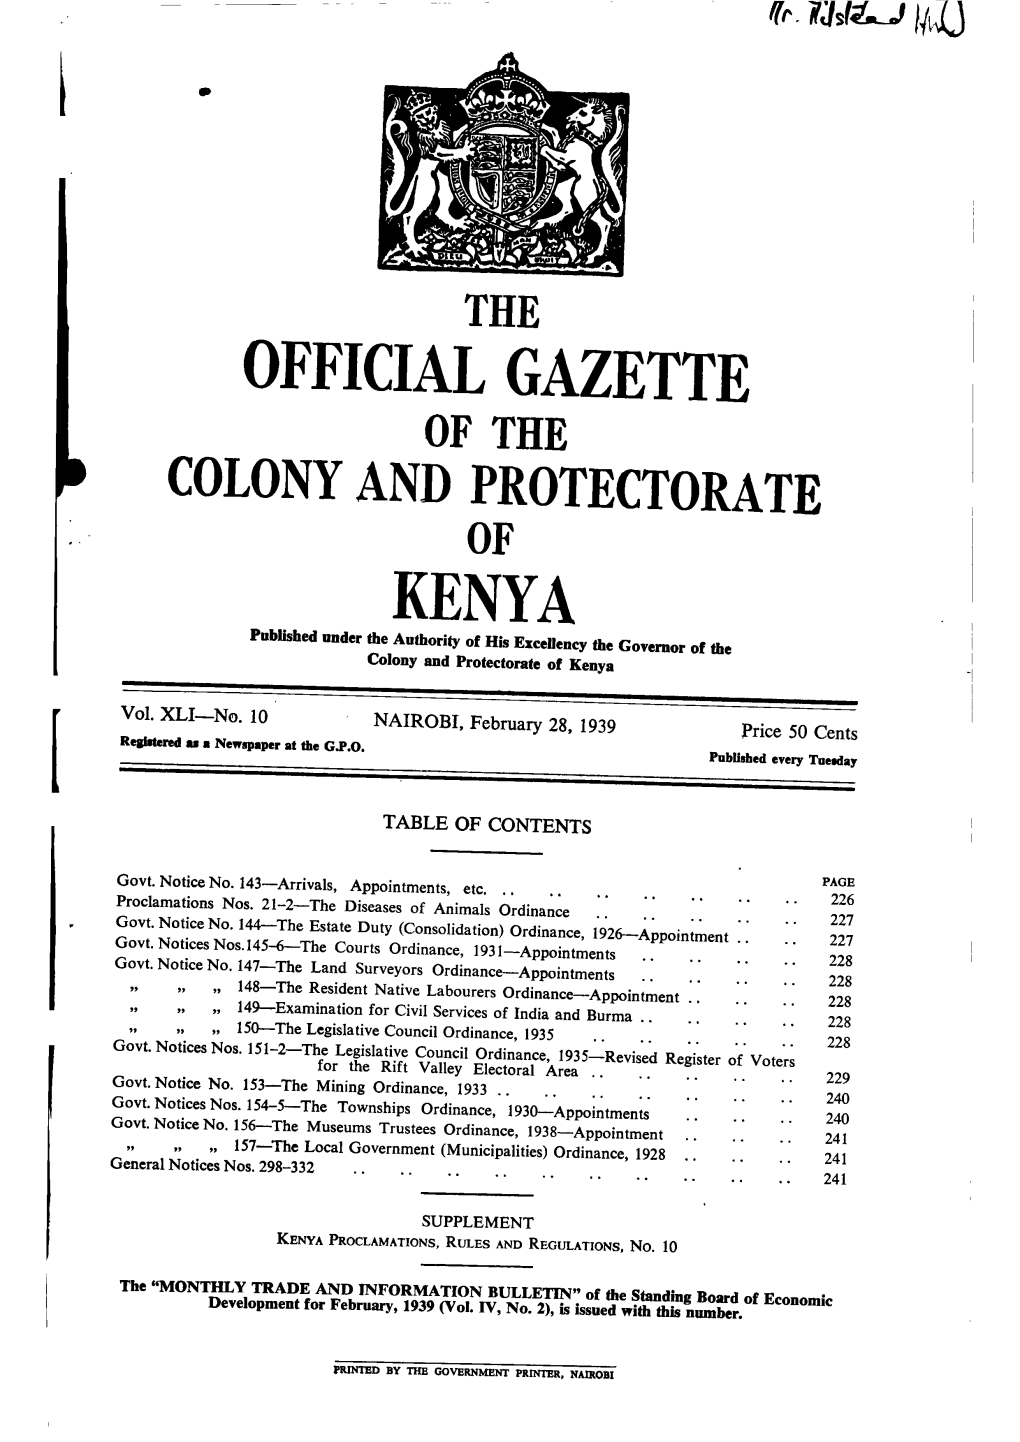 KEI[YA Publishe'd Under the Authority of His Exccrency the Govcmor of Thc Colony and Protectorate of Kenya